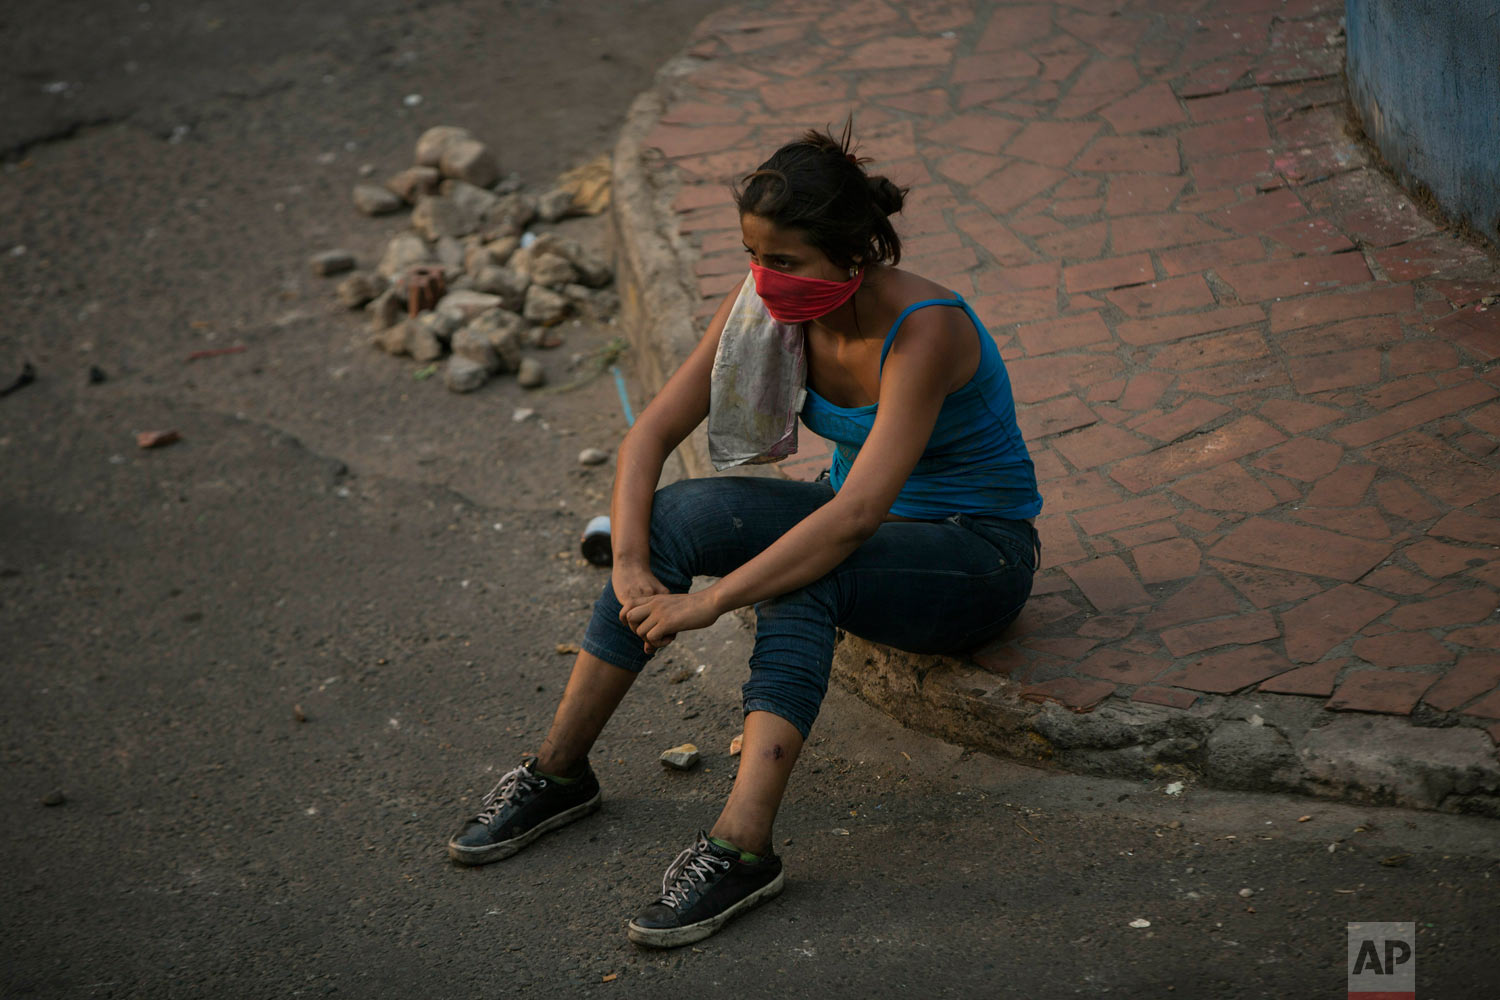  An opposition demonstrator rests after clashing with the Bolivarian National Guard in Urena, Venezuela, near the border with Colombia, Saturday, Feb. 23, 2019. (AP Photo/Rodrigo Abd) 